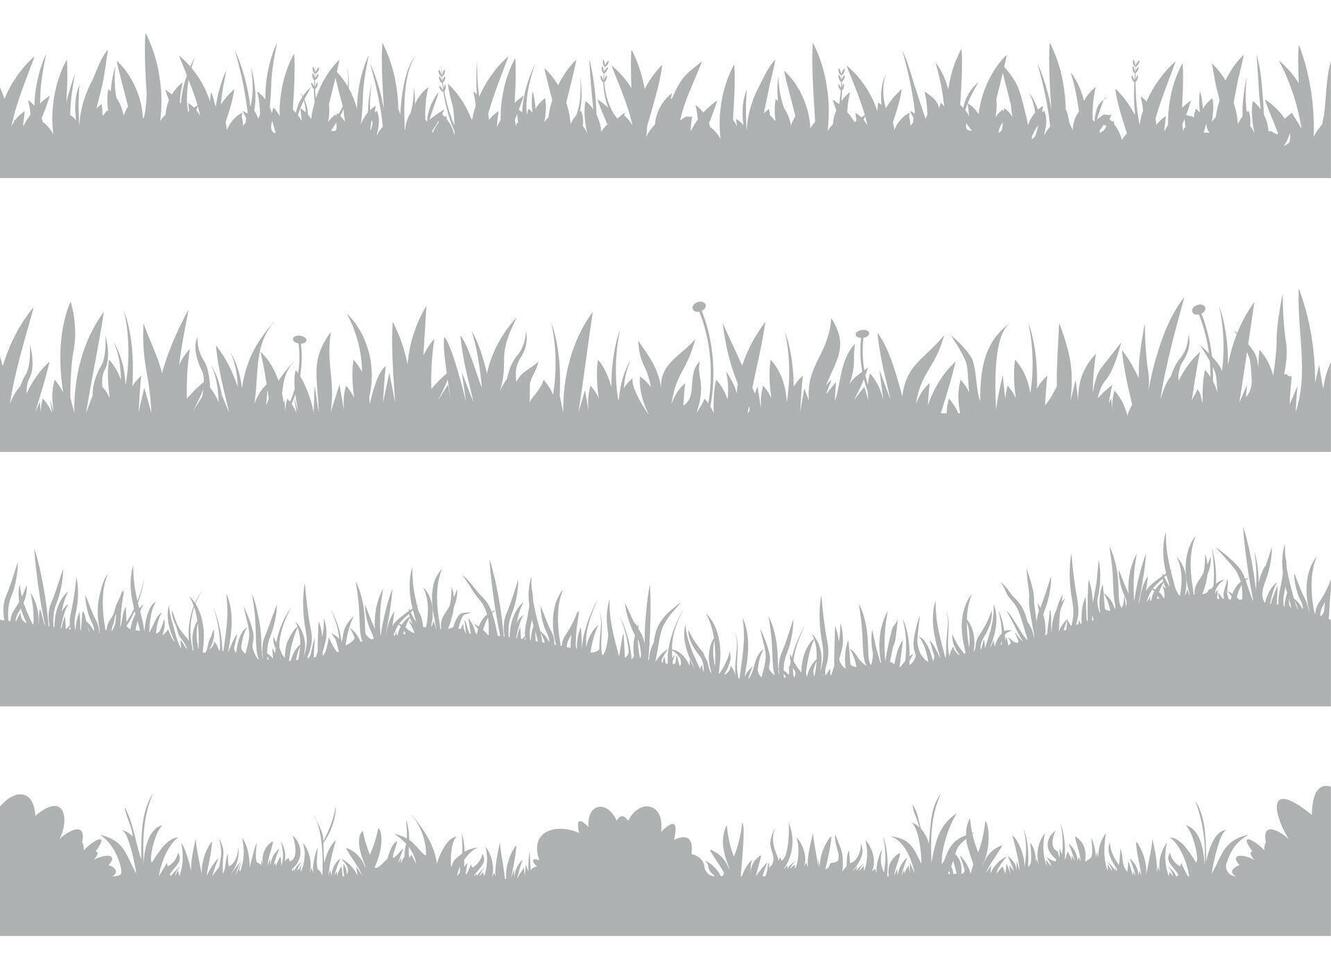 Grass silhouette. Horizontal banners of meadow grassland borders, lawn landscape monochrome elements, nature blossom panorama. Vector set